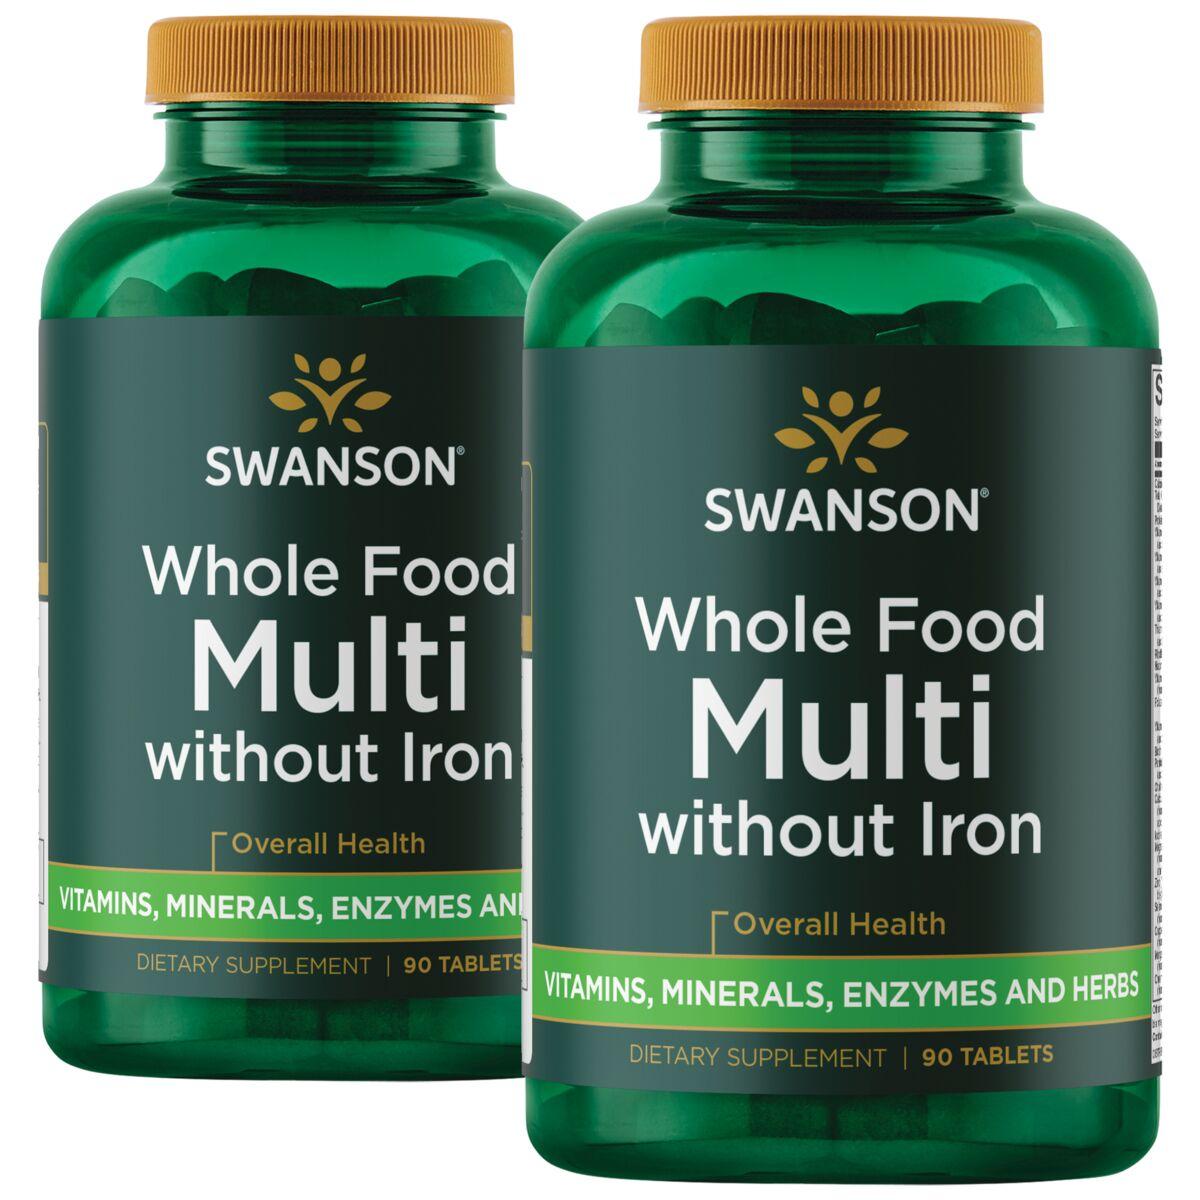 Swanson Ultra Whole Food Multi Enhanced Absorption - Without Iron 2 Pack Vitamin 90 Tabs Per Bottle